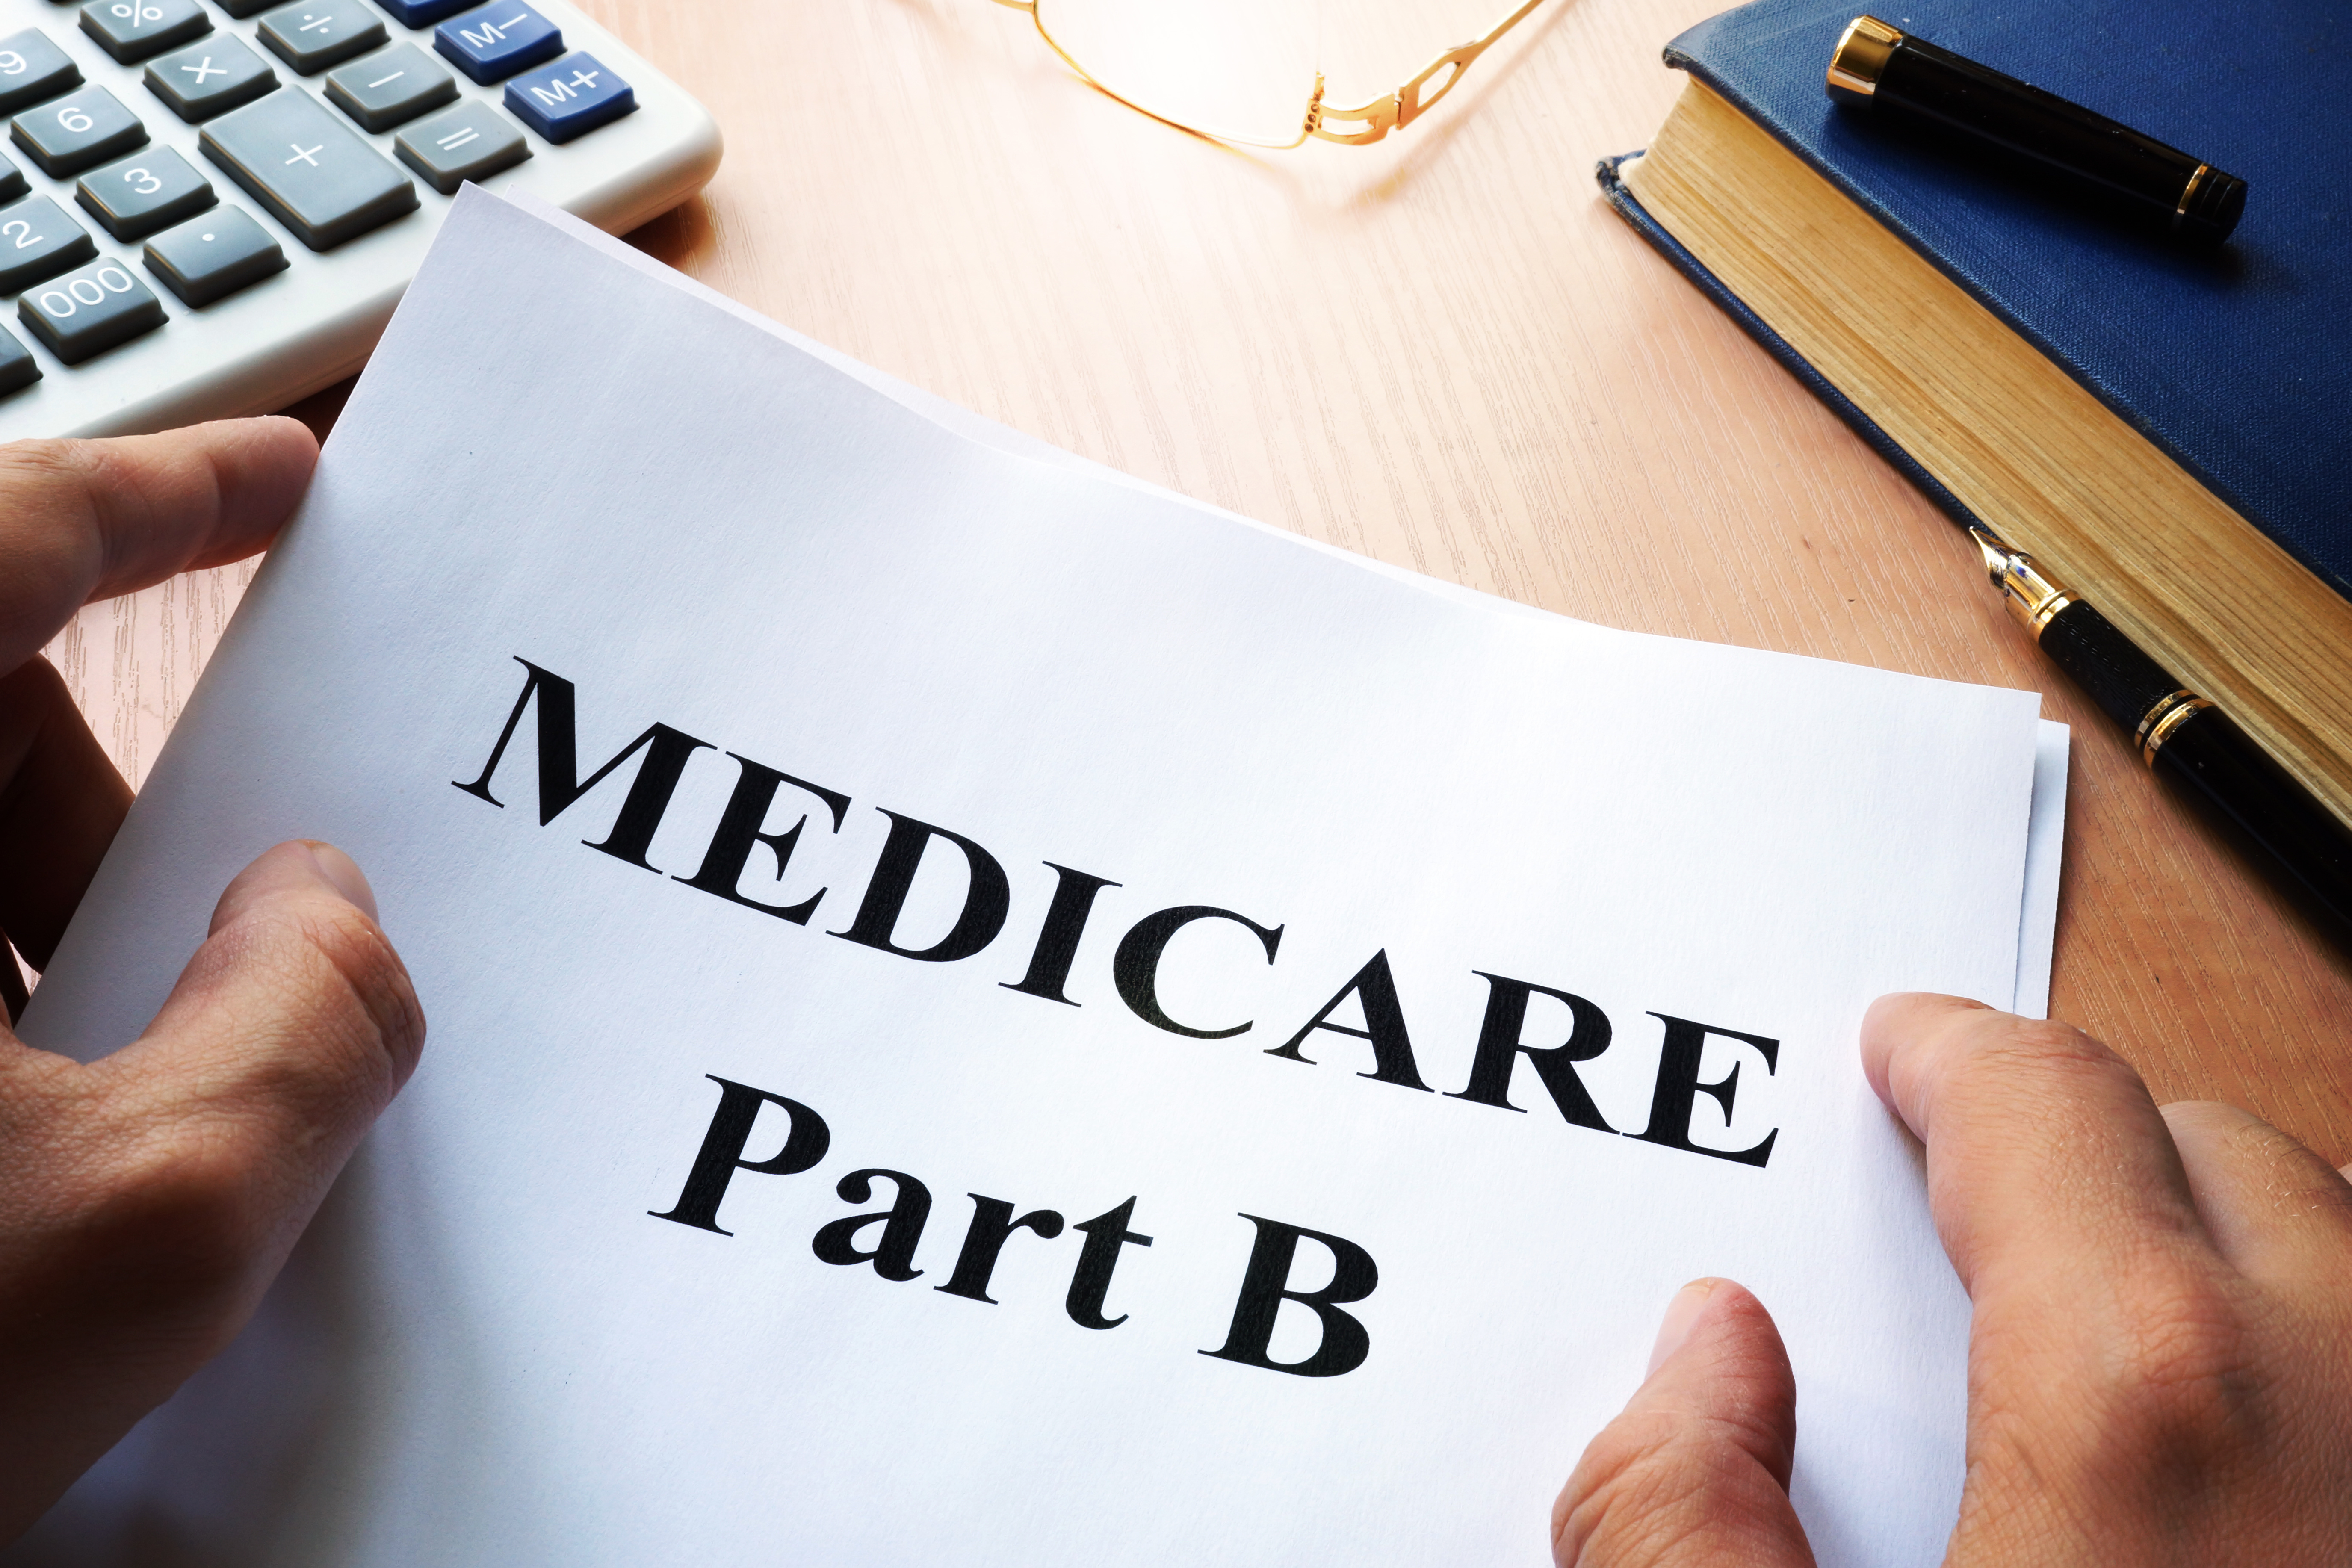 medicare-part-b-title-on-document